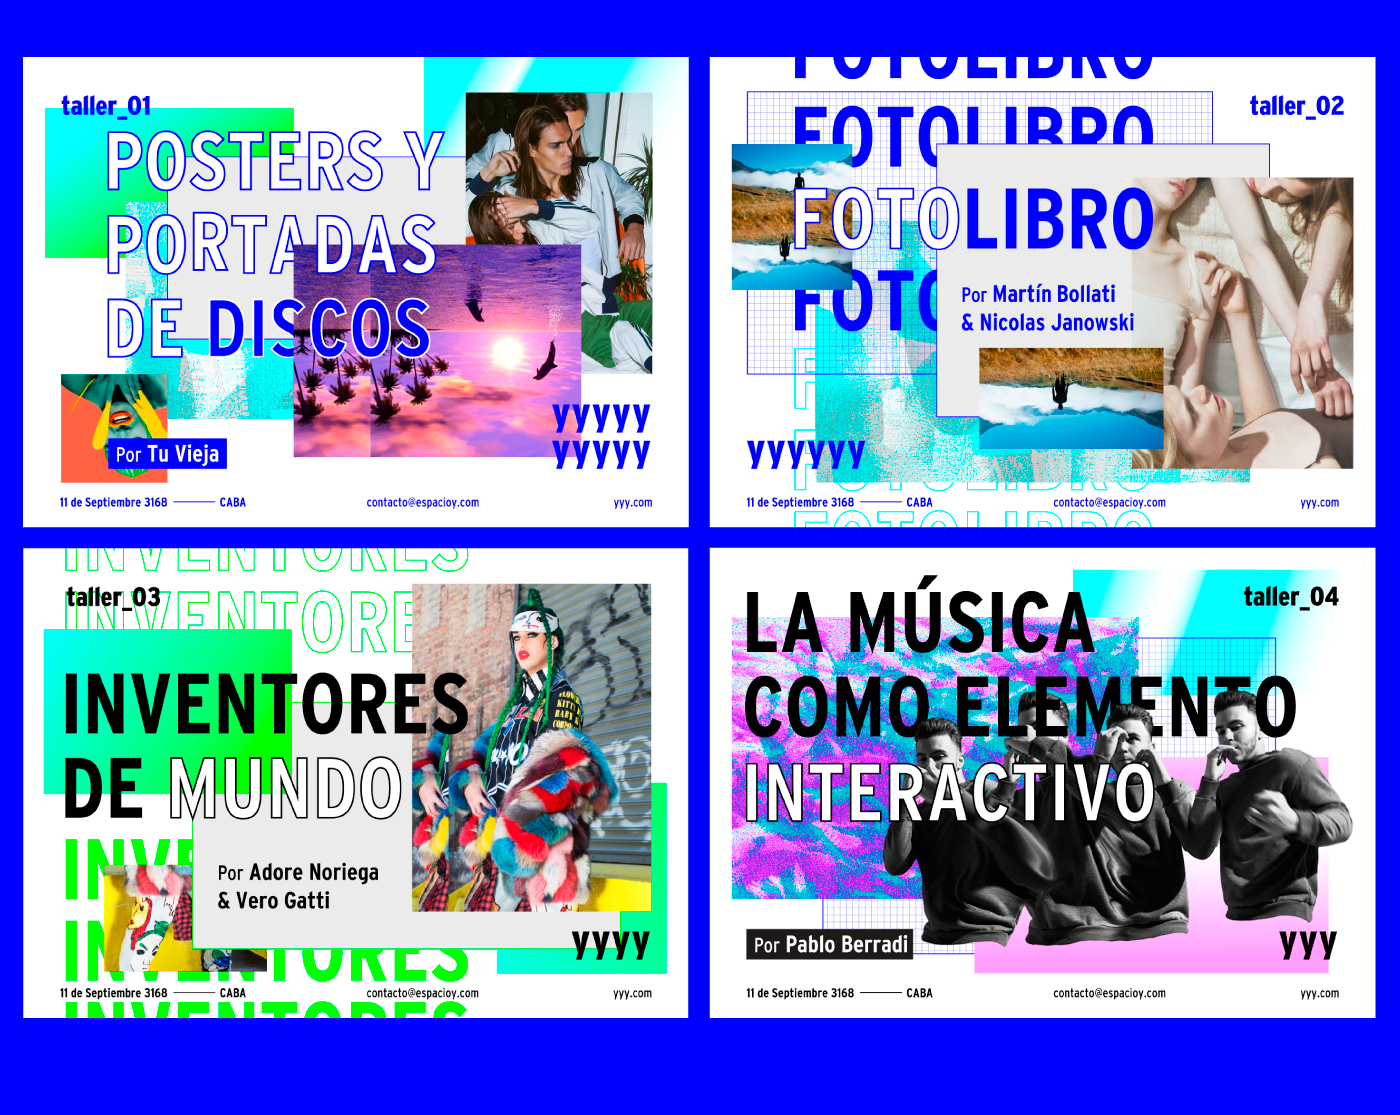 Internet youth type espacio cultural posters gradient colours flyer BUENOS AIRES ARGENTINA